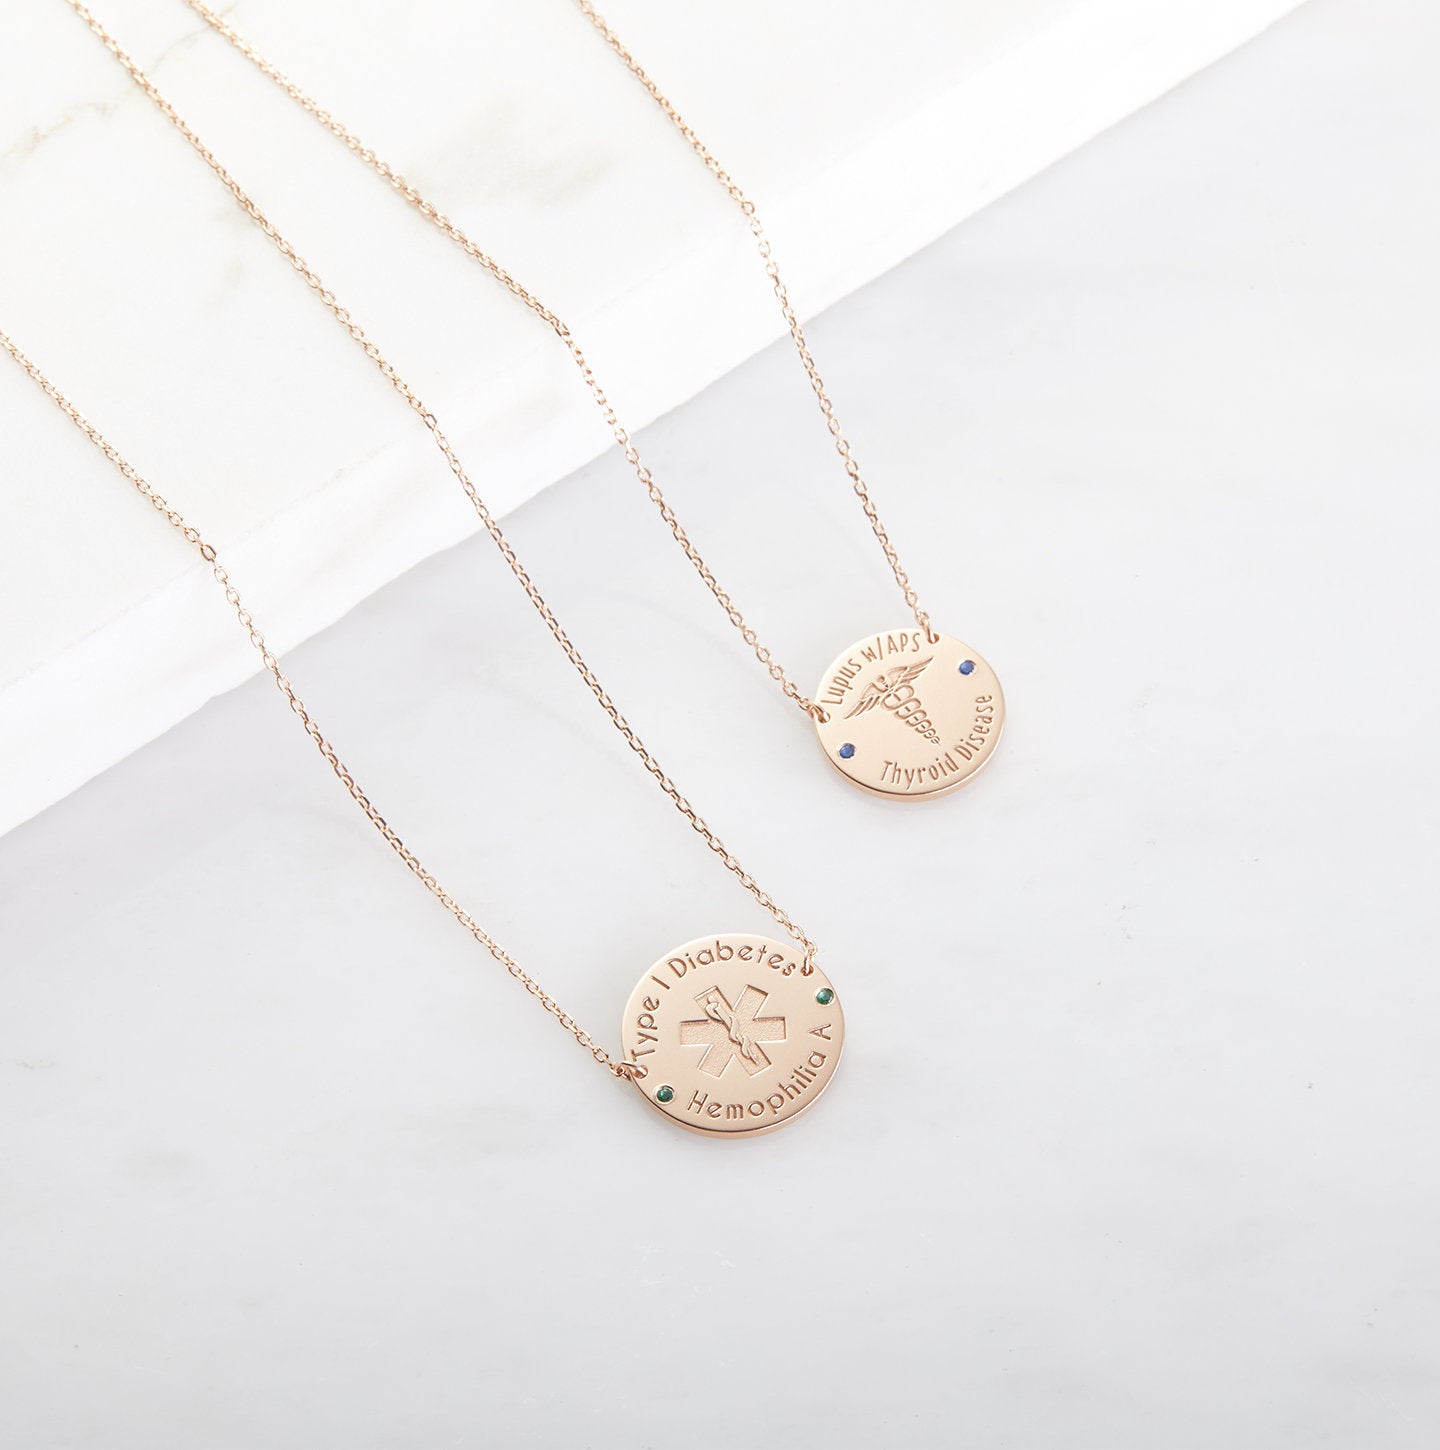 A Medical Alert Necklace That Mom Might Wear